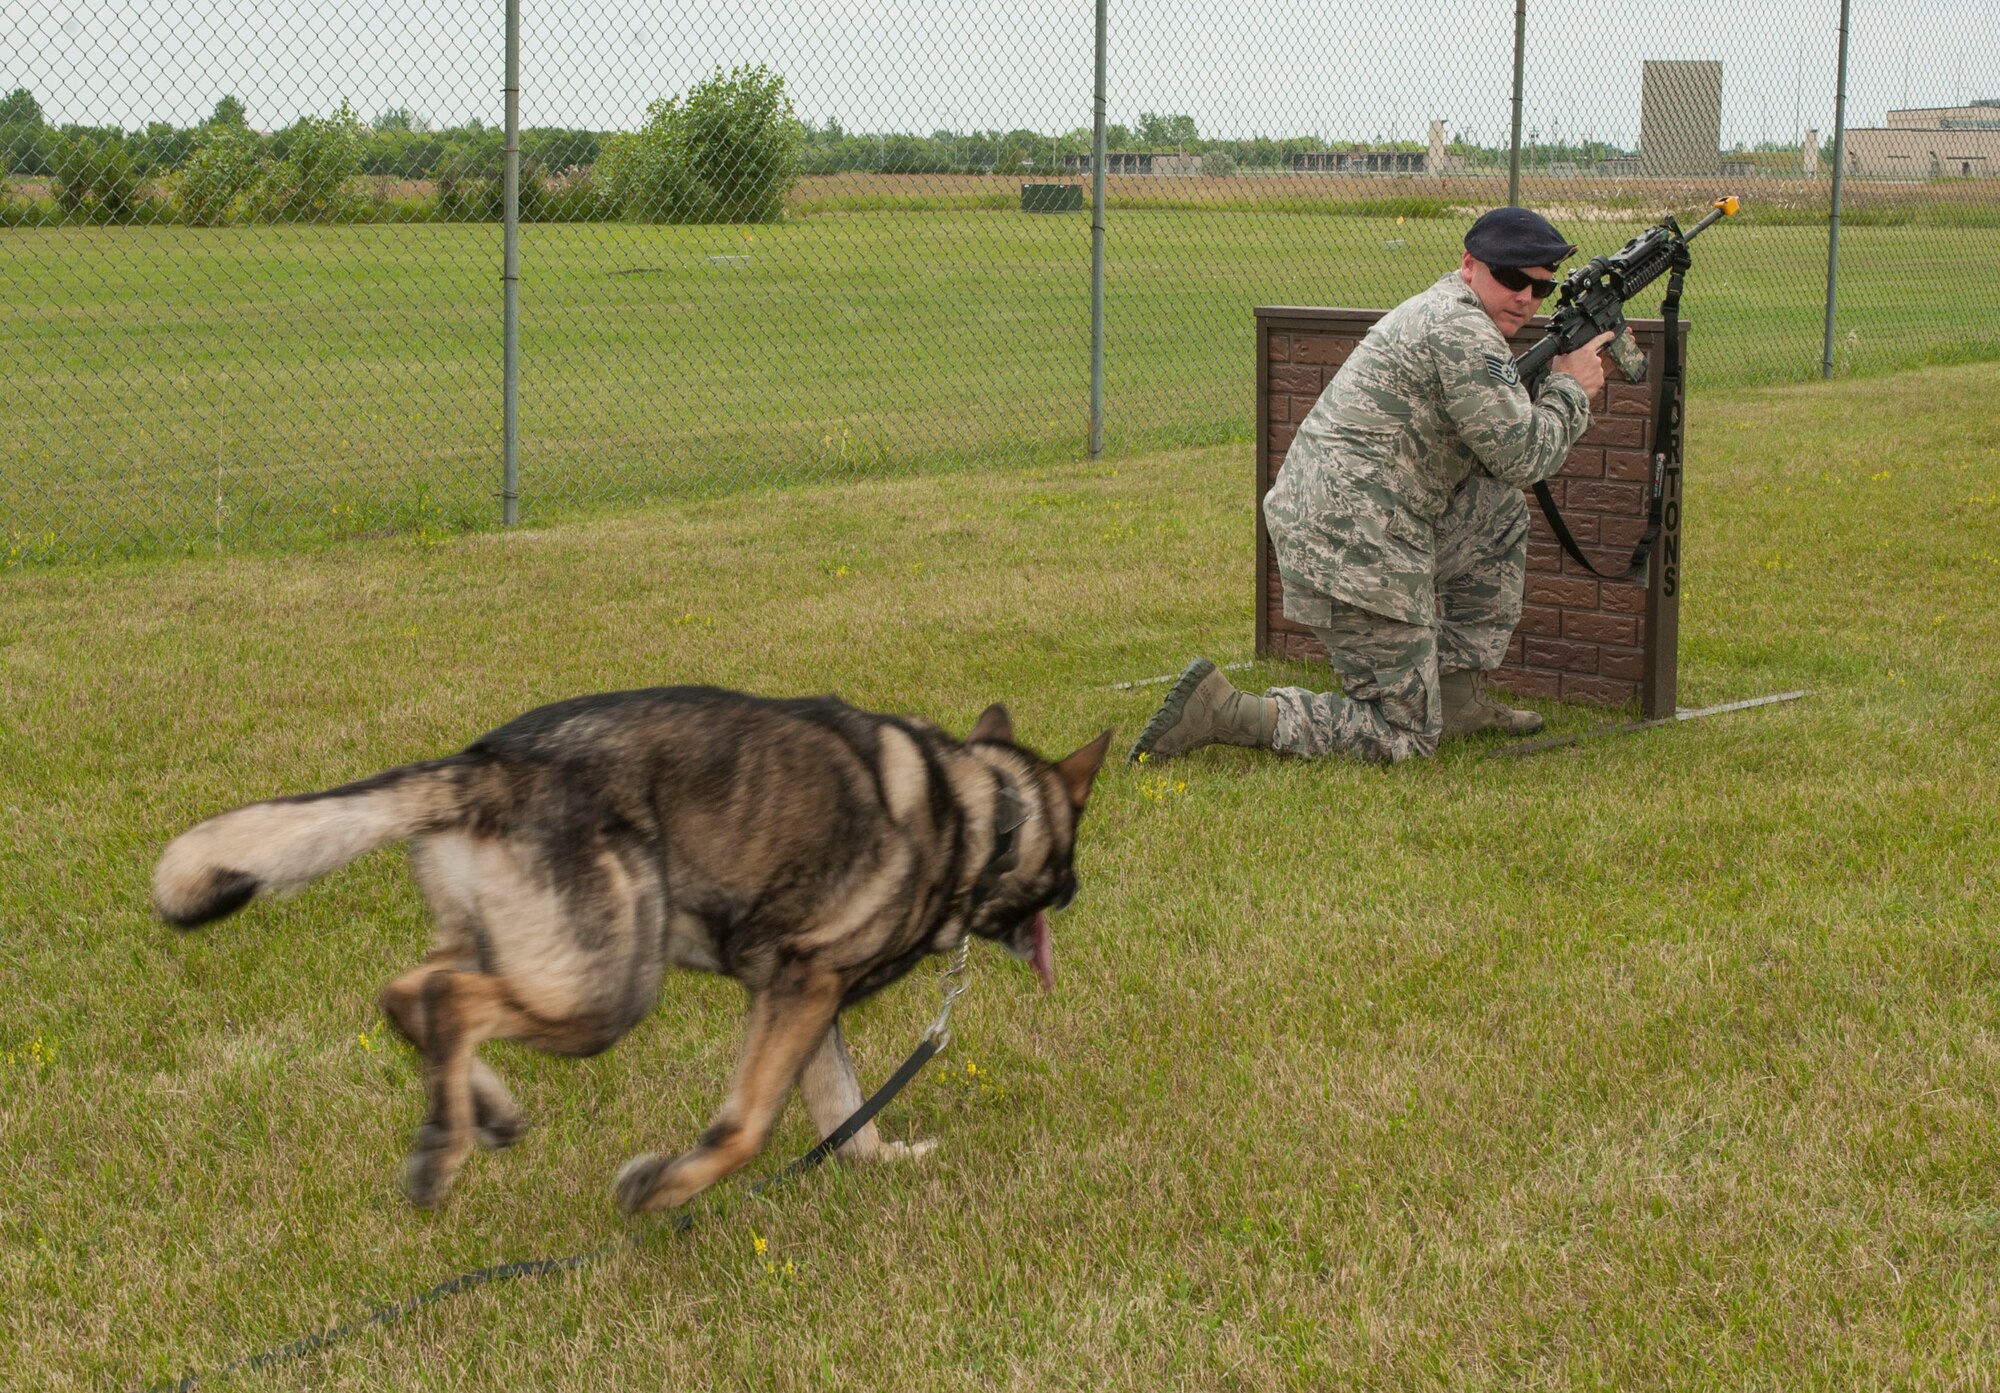 Staff Sgt. Tim Glover, 5th Security Forces Squadron military working dog handler, calls his MWD Roko to him during weapons training on Minot Air Force Base, N.D., July 28, 2014. After watching MWD handlers work at his last base, Glover decided he wanted to specialize and applied to become one. (U.S. Air Force photo/Senior Airman Stephanie Morris)